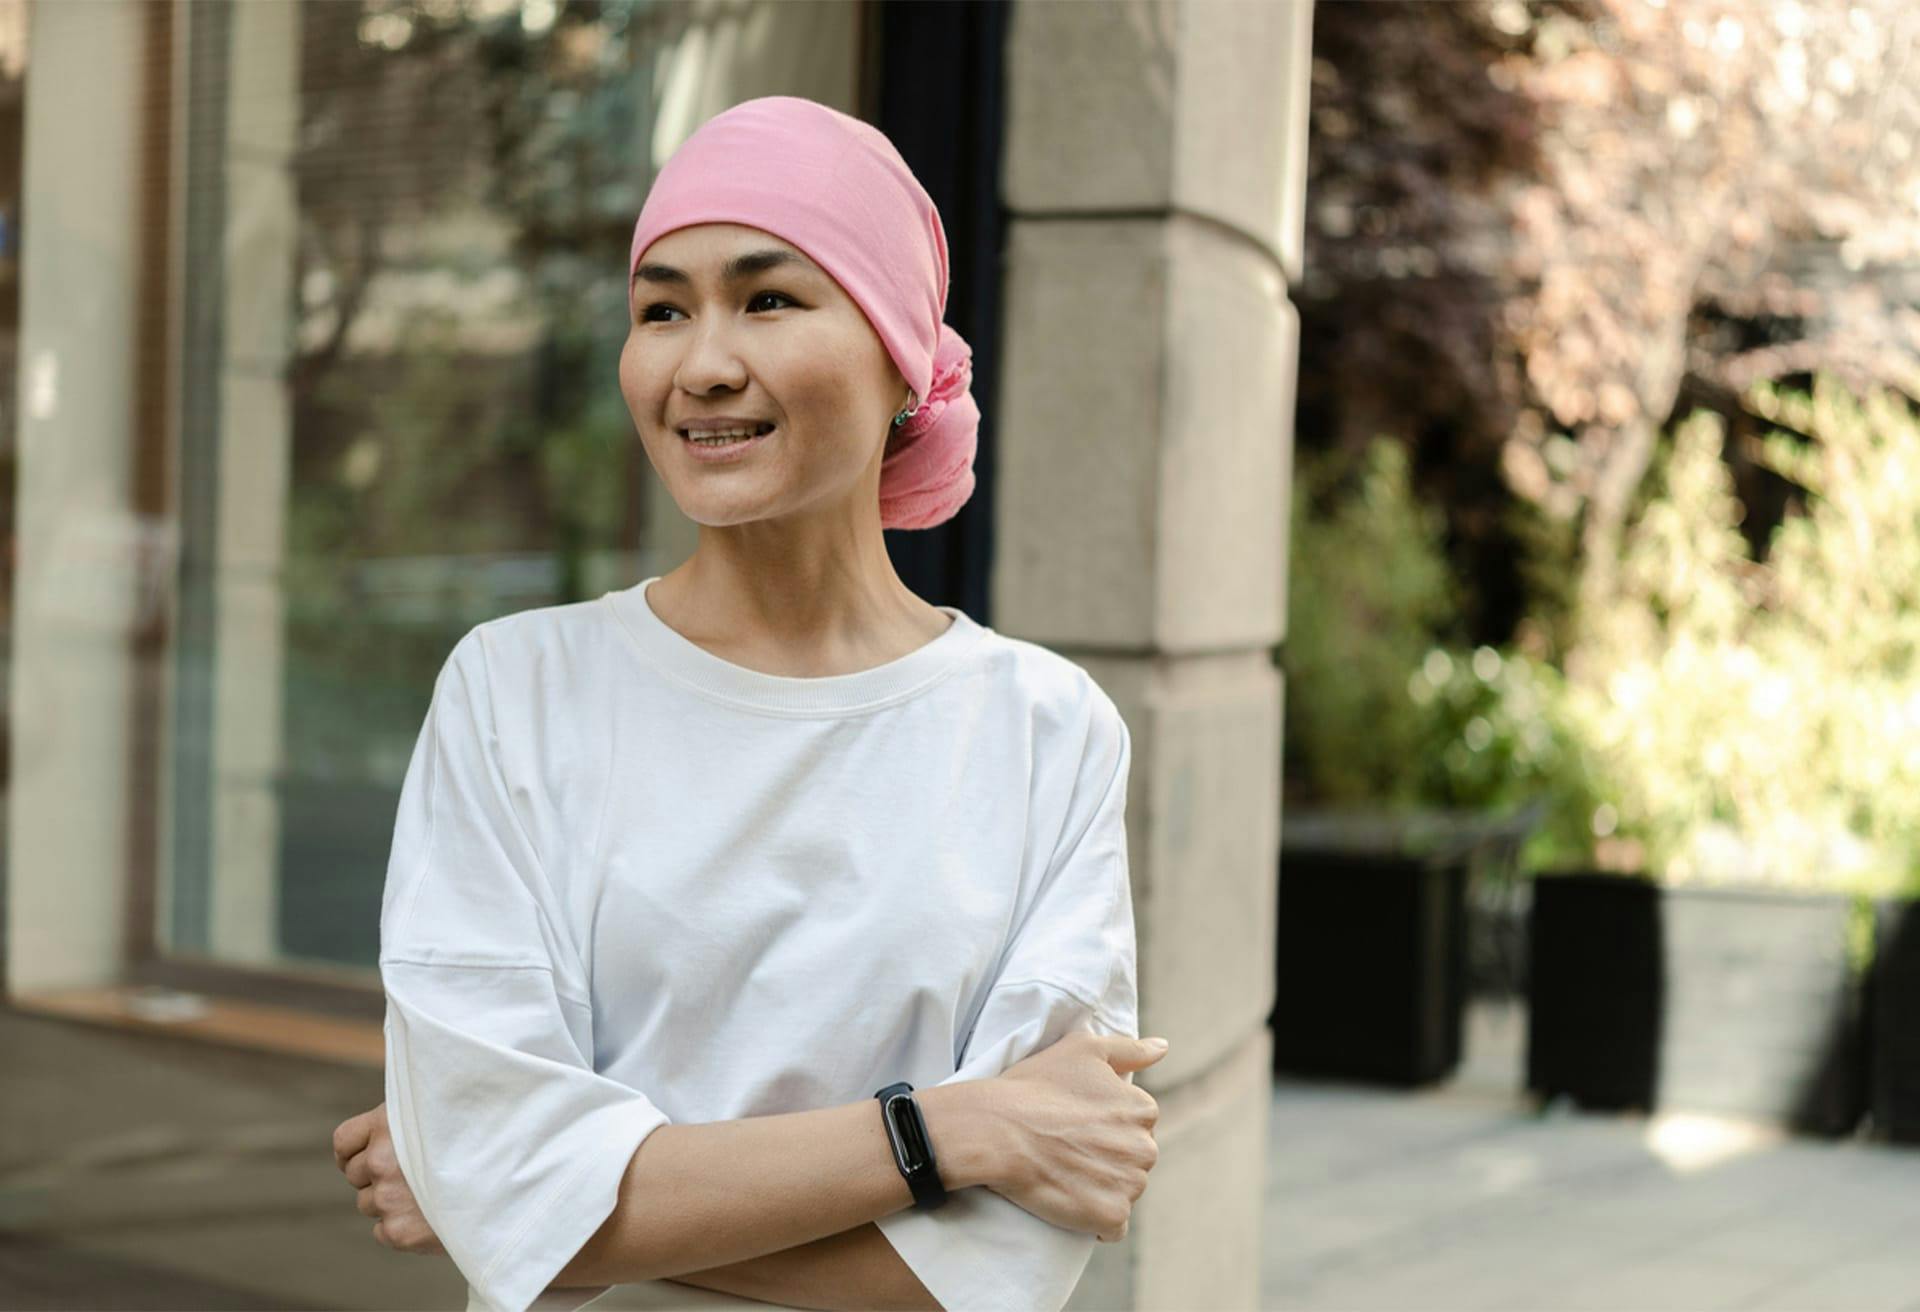 Woman with White T-shirt and Pink Head Cover